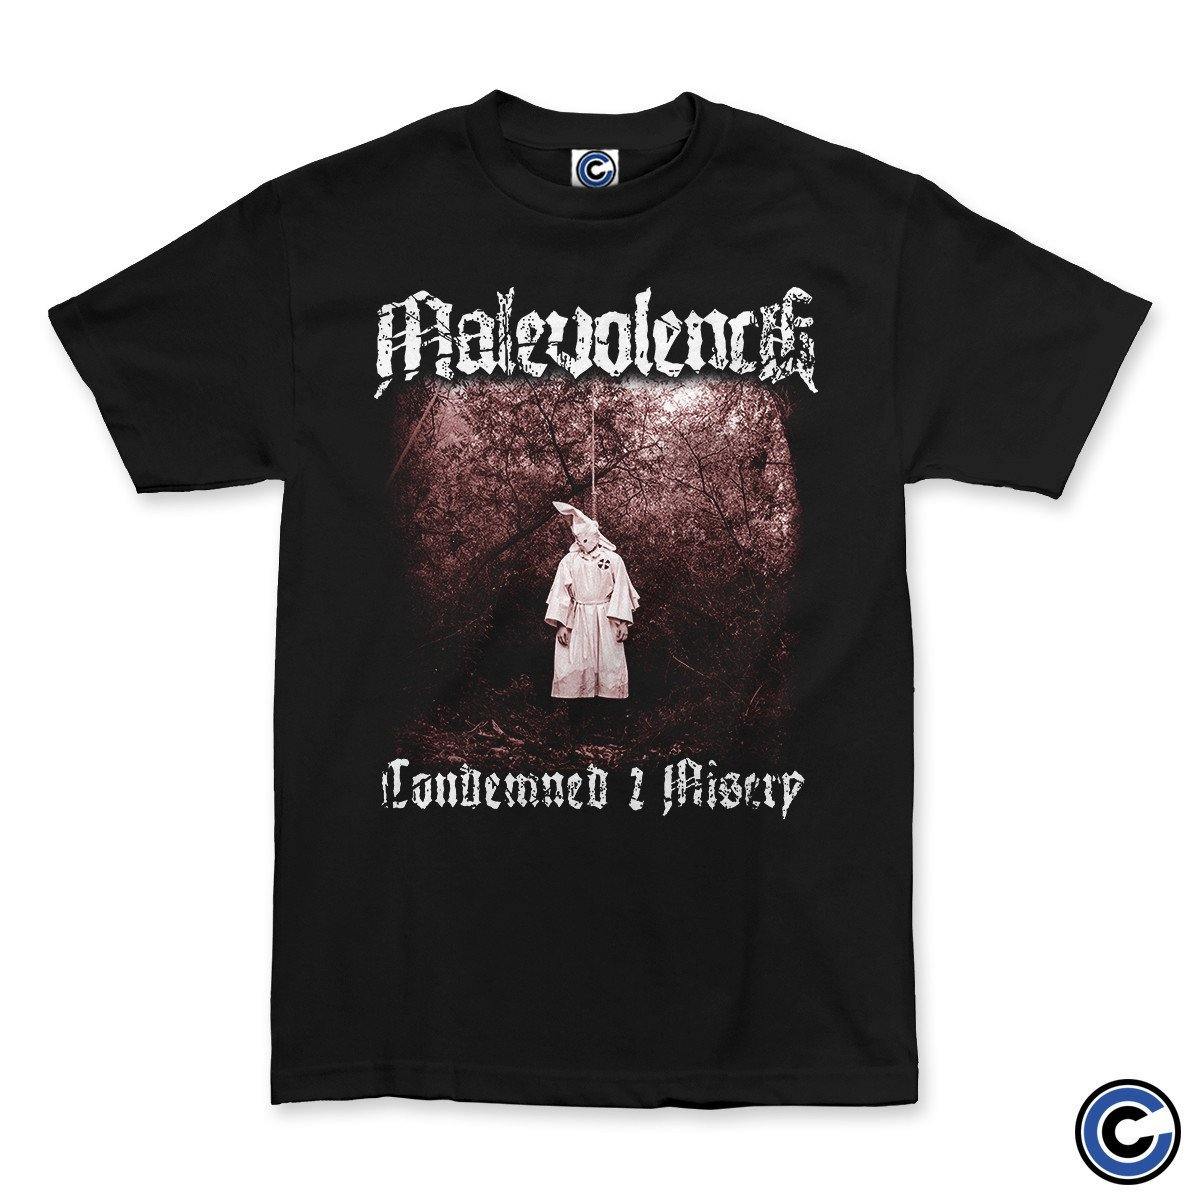 Buy – Malevolence "Condemned" Shirt – Band & Music Merch – Cold Cuts Merch